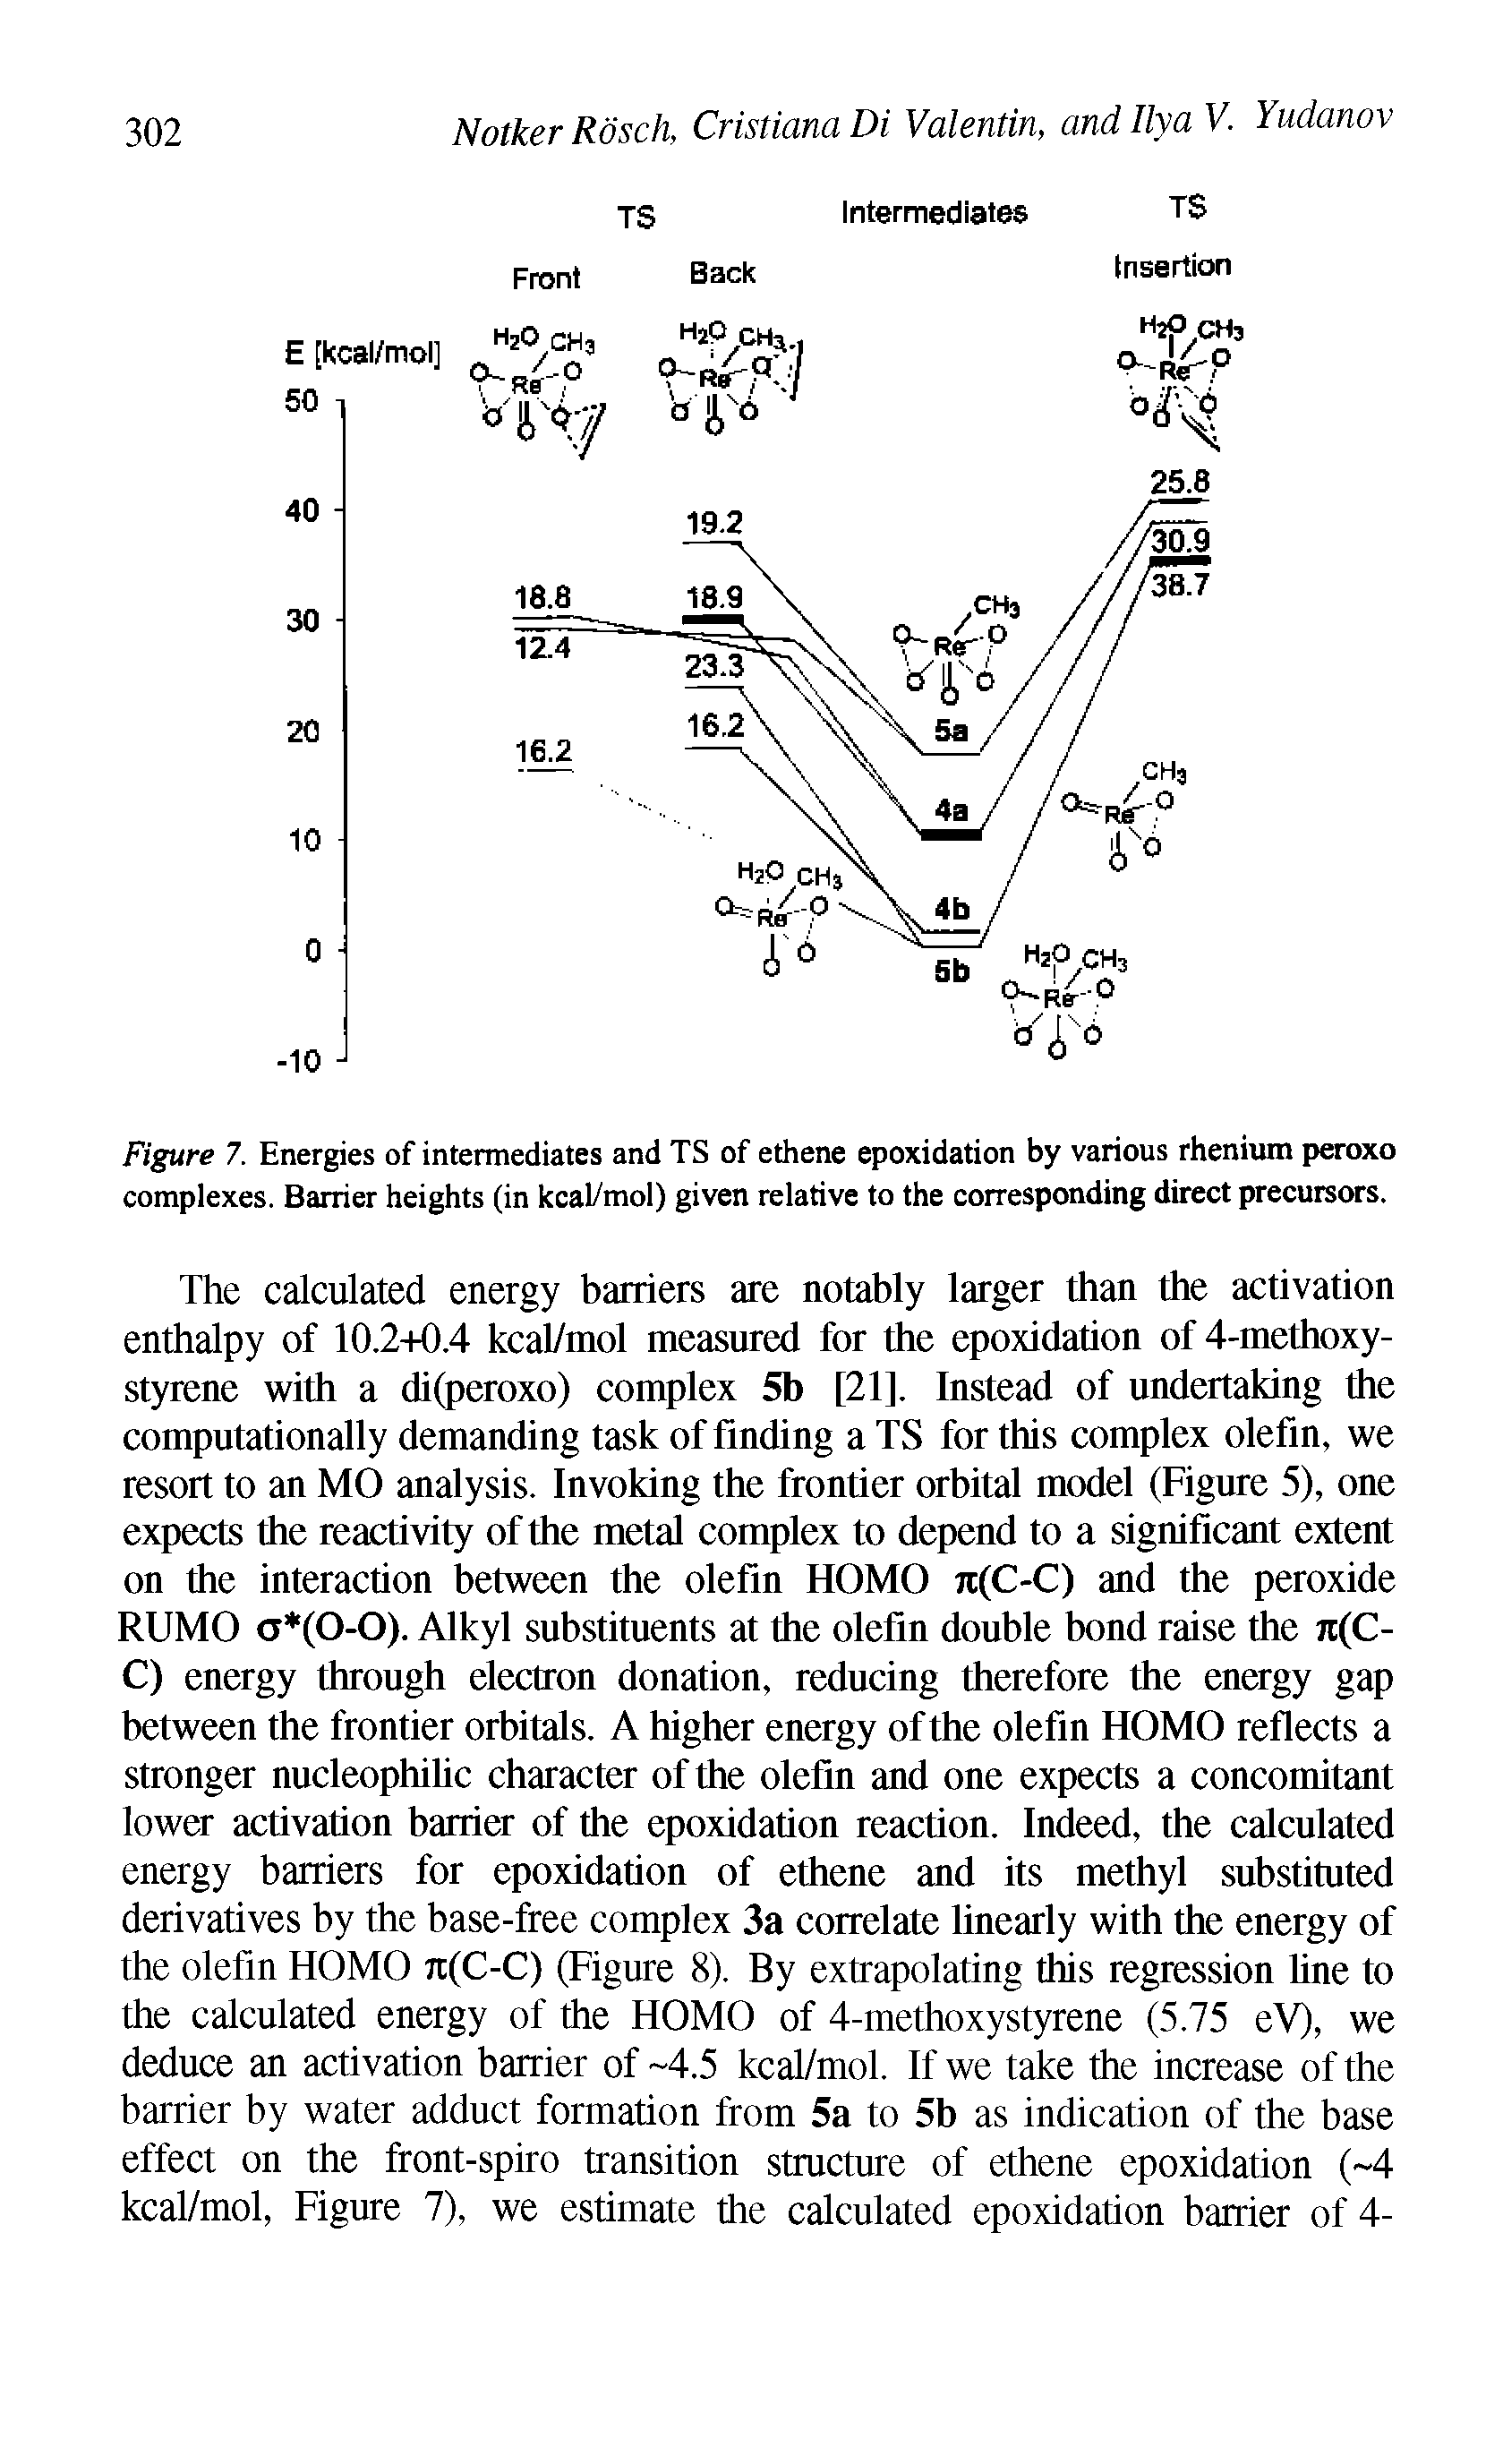 Figure 7. Energies of intermediates and TS of ethene epoxidation by various rhenium peroxo complexes. Barrier heights (in kcal/mol) given relative to the corresponding direct precursors.